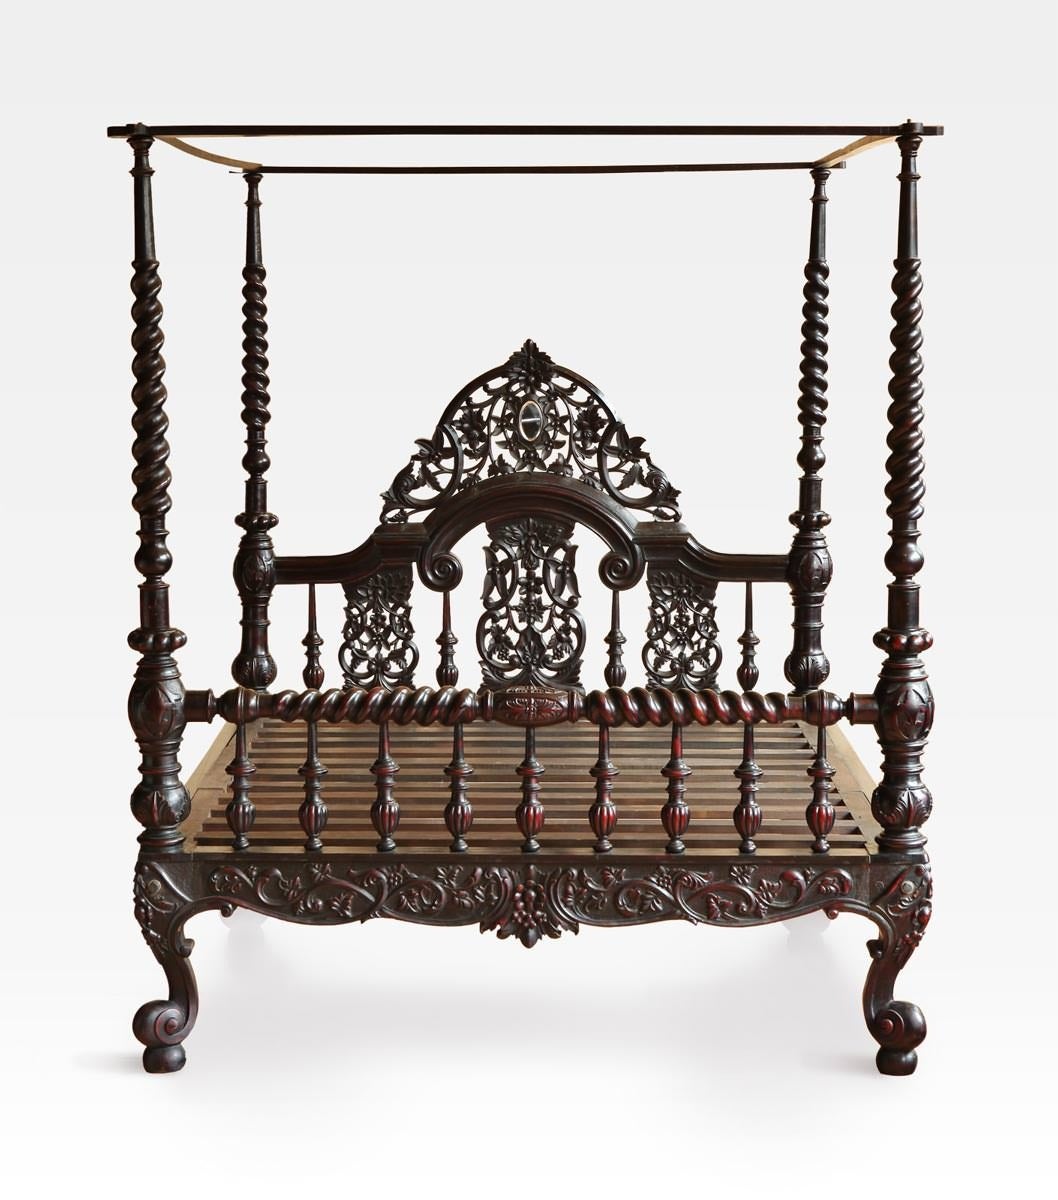 Anglo-Indian Colonial Rosewood Four-Poster Bed, 19th Century